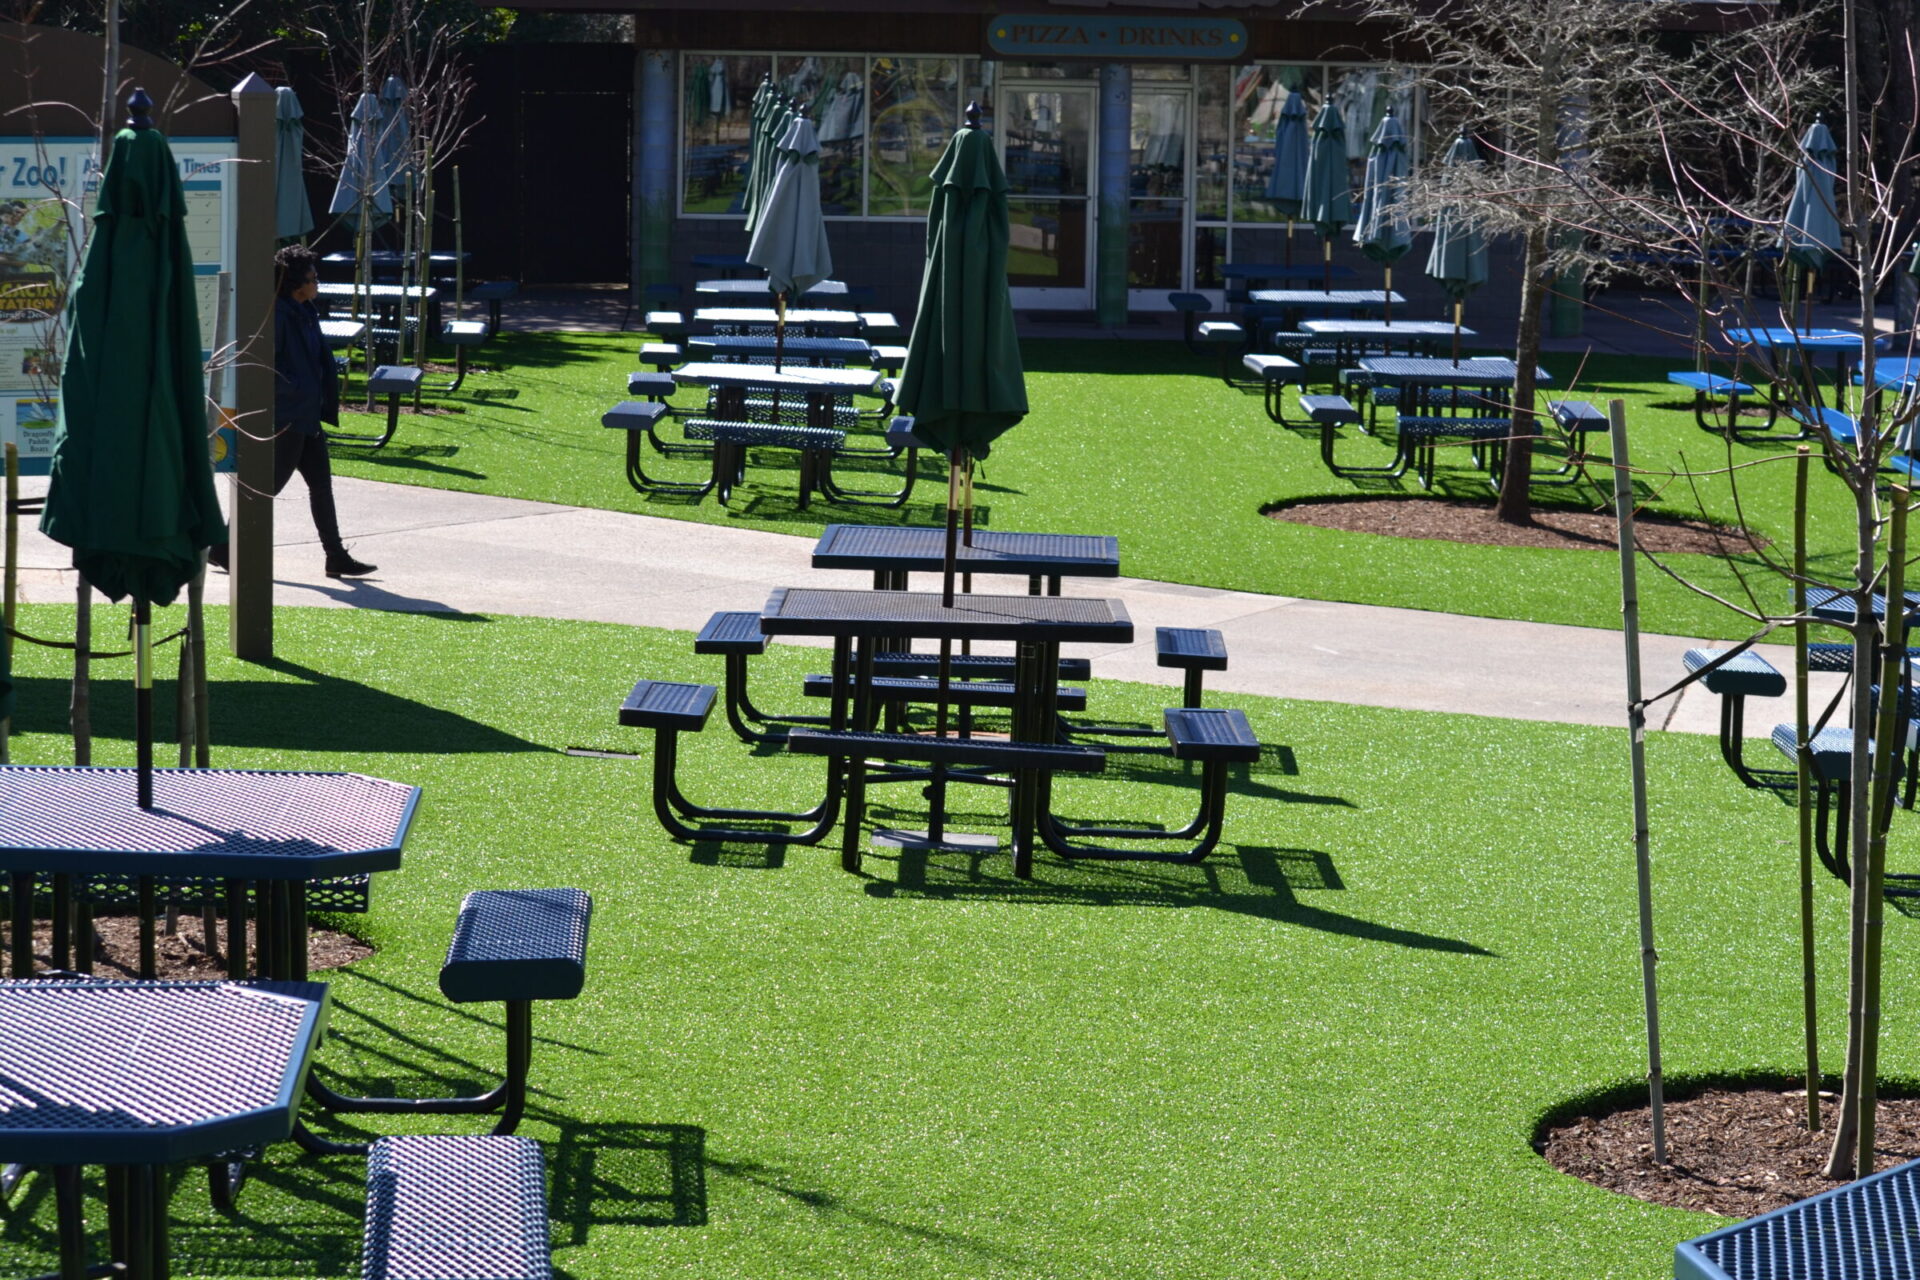 Outdoor seating area with green artificial turf, multiple picnic tables, closed umbrellas, and a person walking by under a clear, sunny sky.